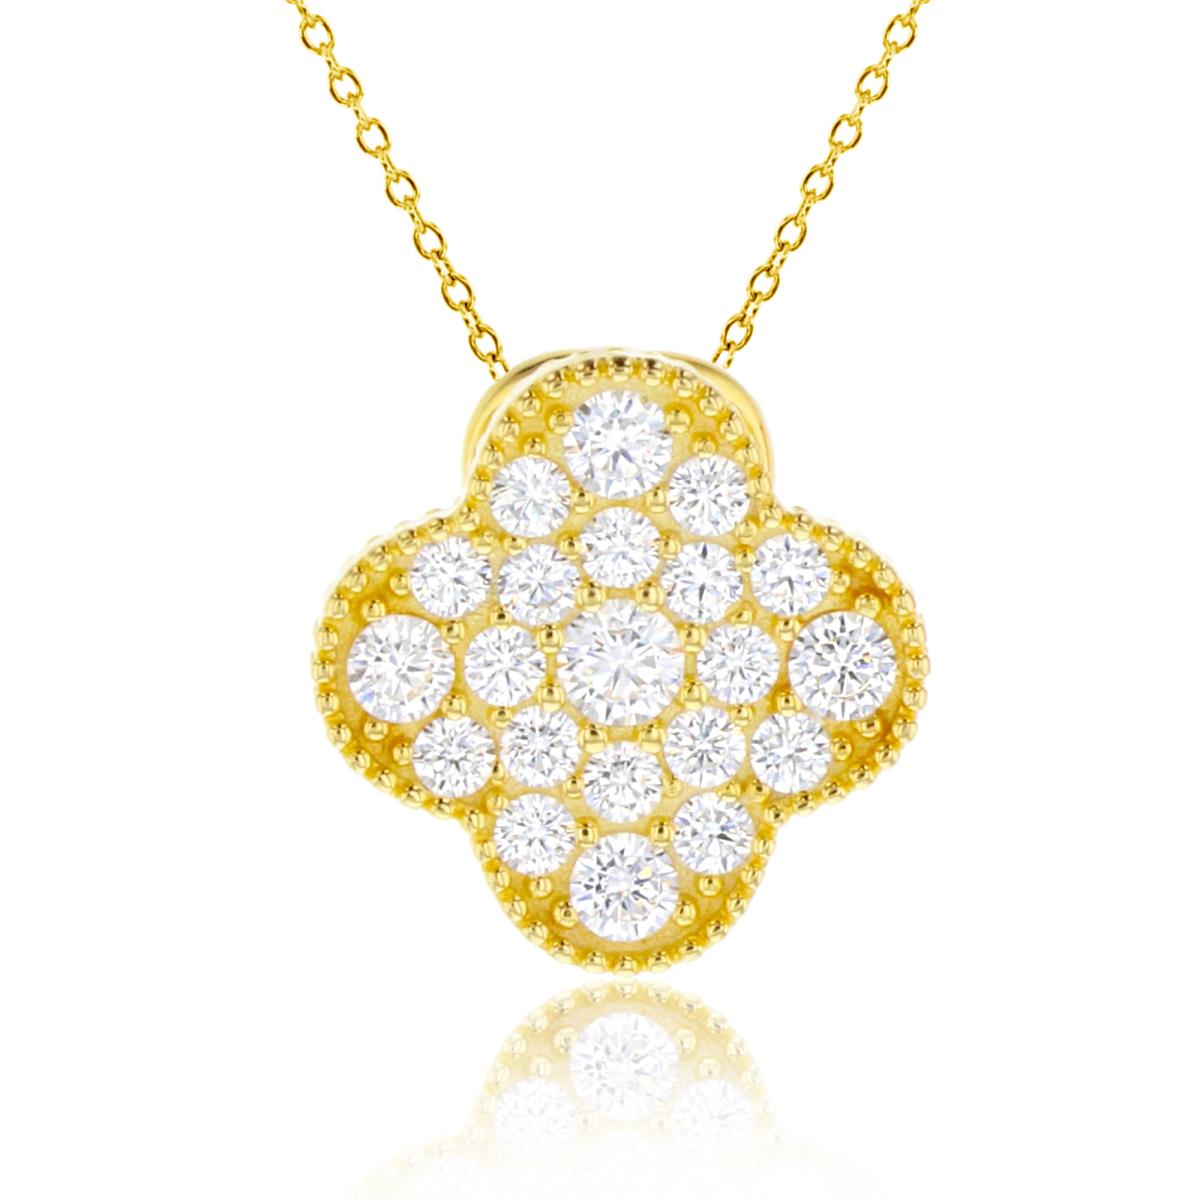 Sterling Silver+1Micron Yellow Gold Rnd CZ Beeded Clover 18"Necklace